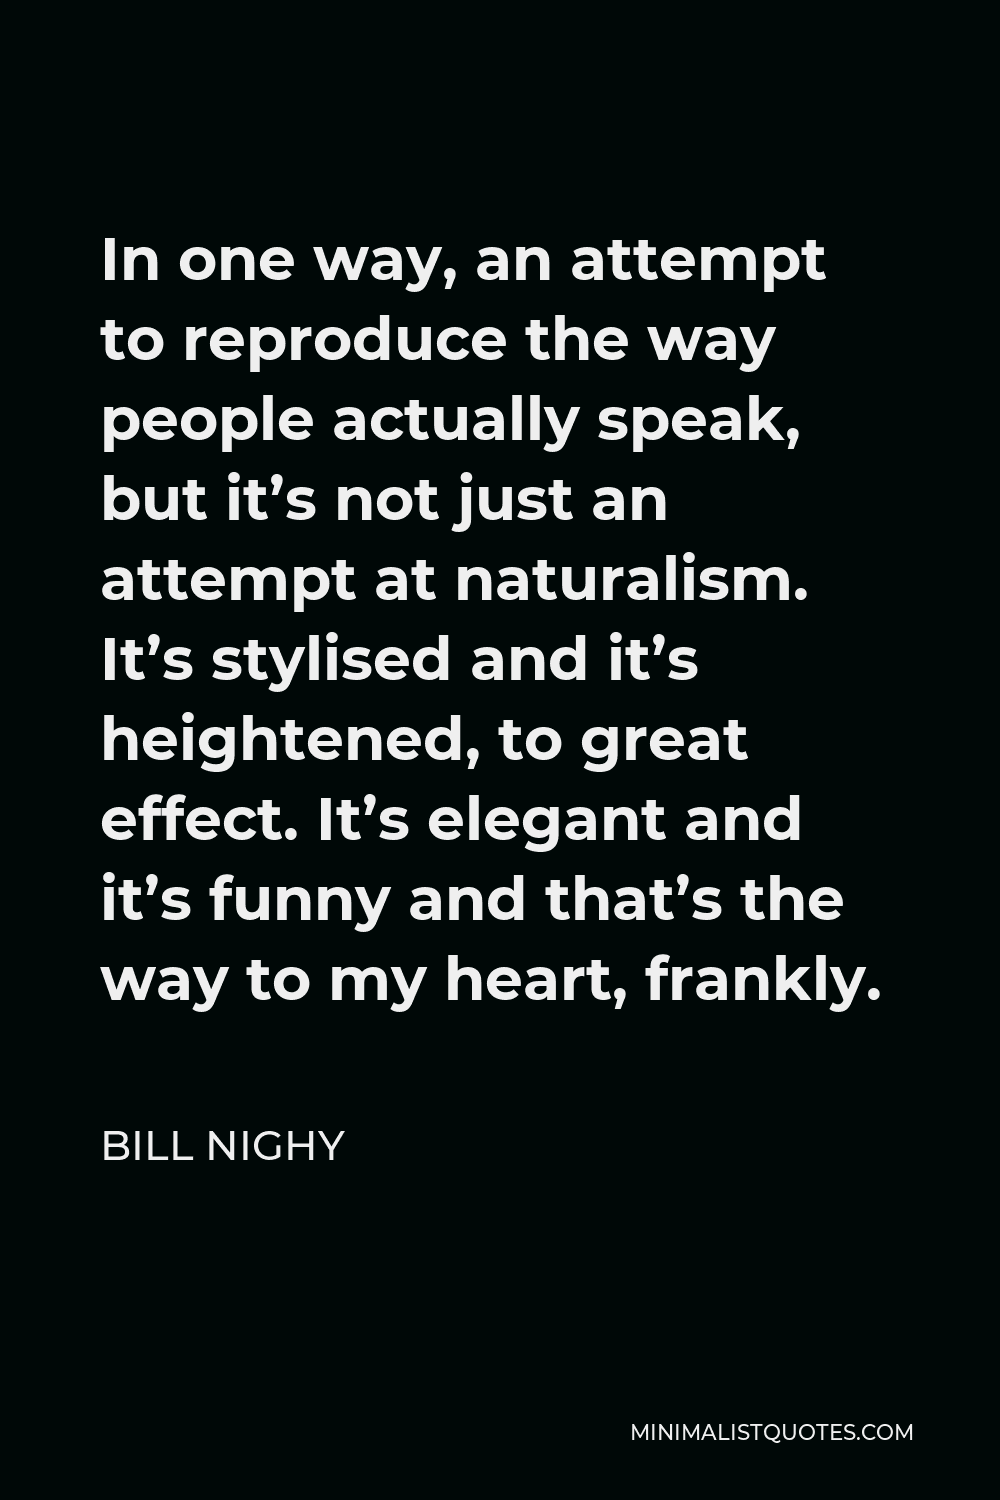 Bill Nighy Quote - In one way, an attempt to reproduce the way people actually speak, but it’s not just an attempt at naturalism. It’s stylised and it’s heightened, to great effect. It’s elegant and it’s funny and that’s the way to my heart, frankly.